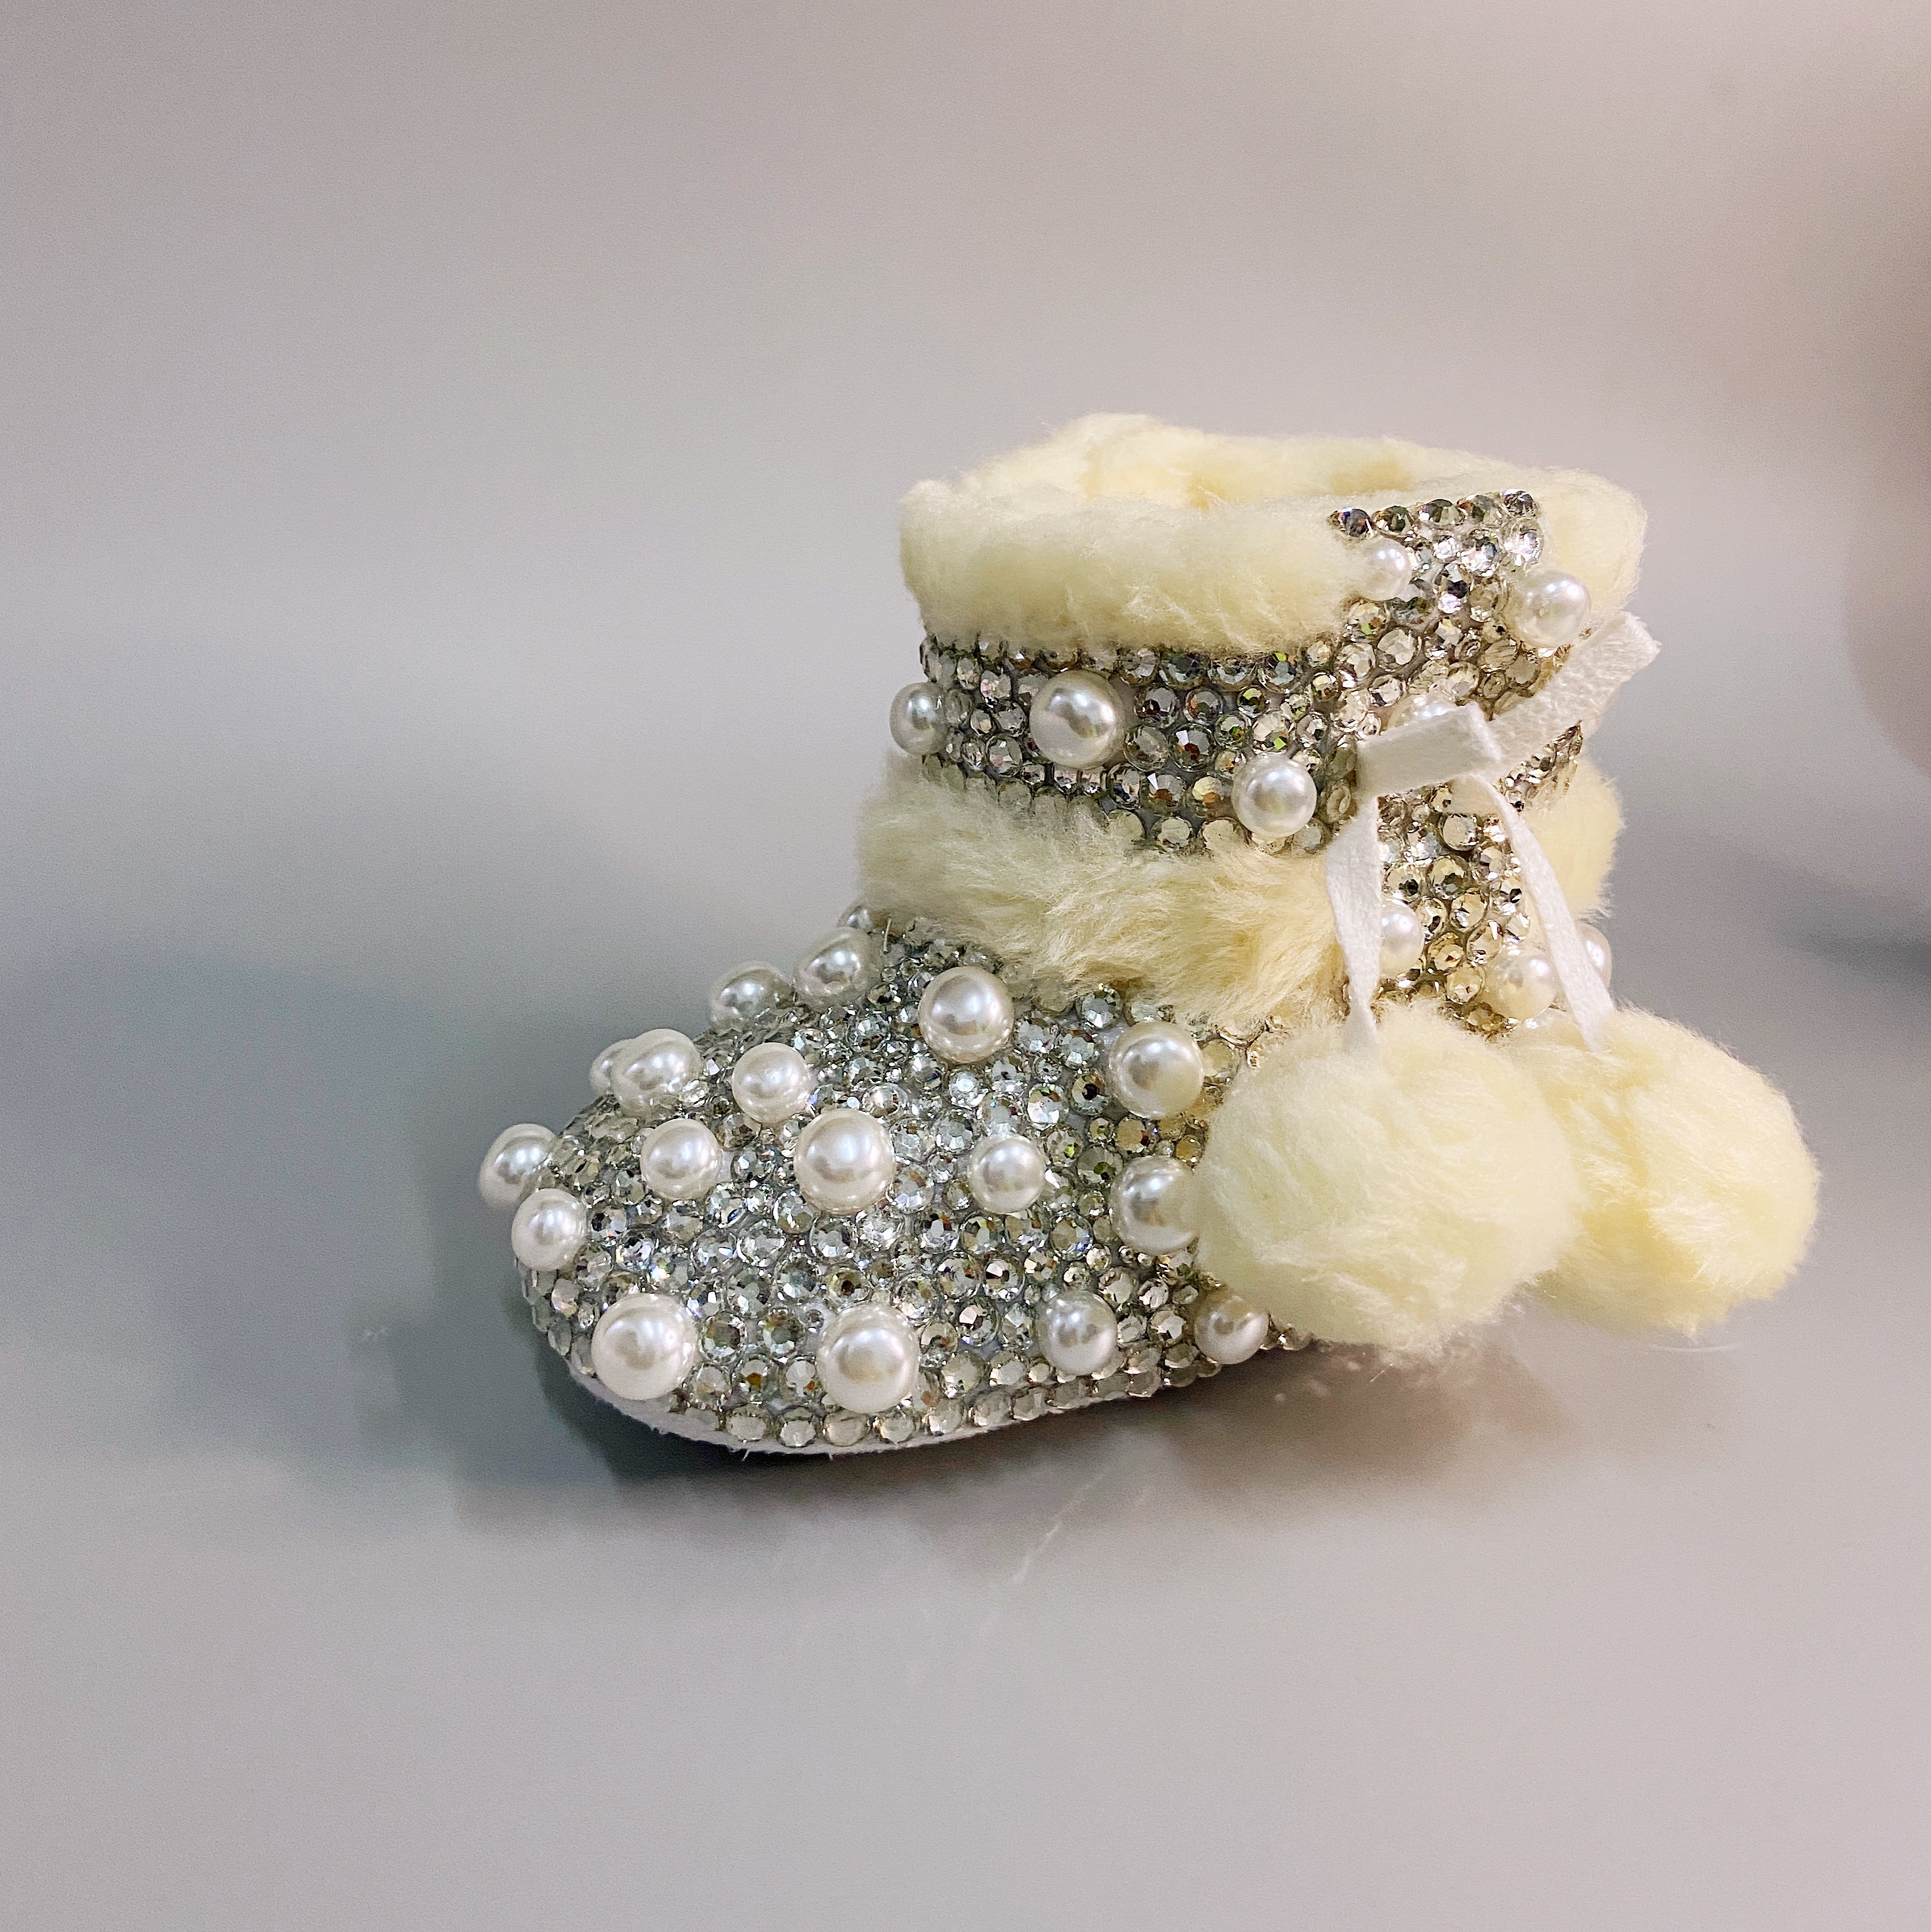 Dollbling-Mommy-Daugther-Baby-Custom-Pearls-Boots-Personalized-Handmade-Luxury-Welcome-Infant-Ivory-Beads-Winter-Botties-2